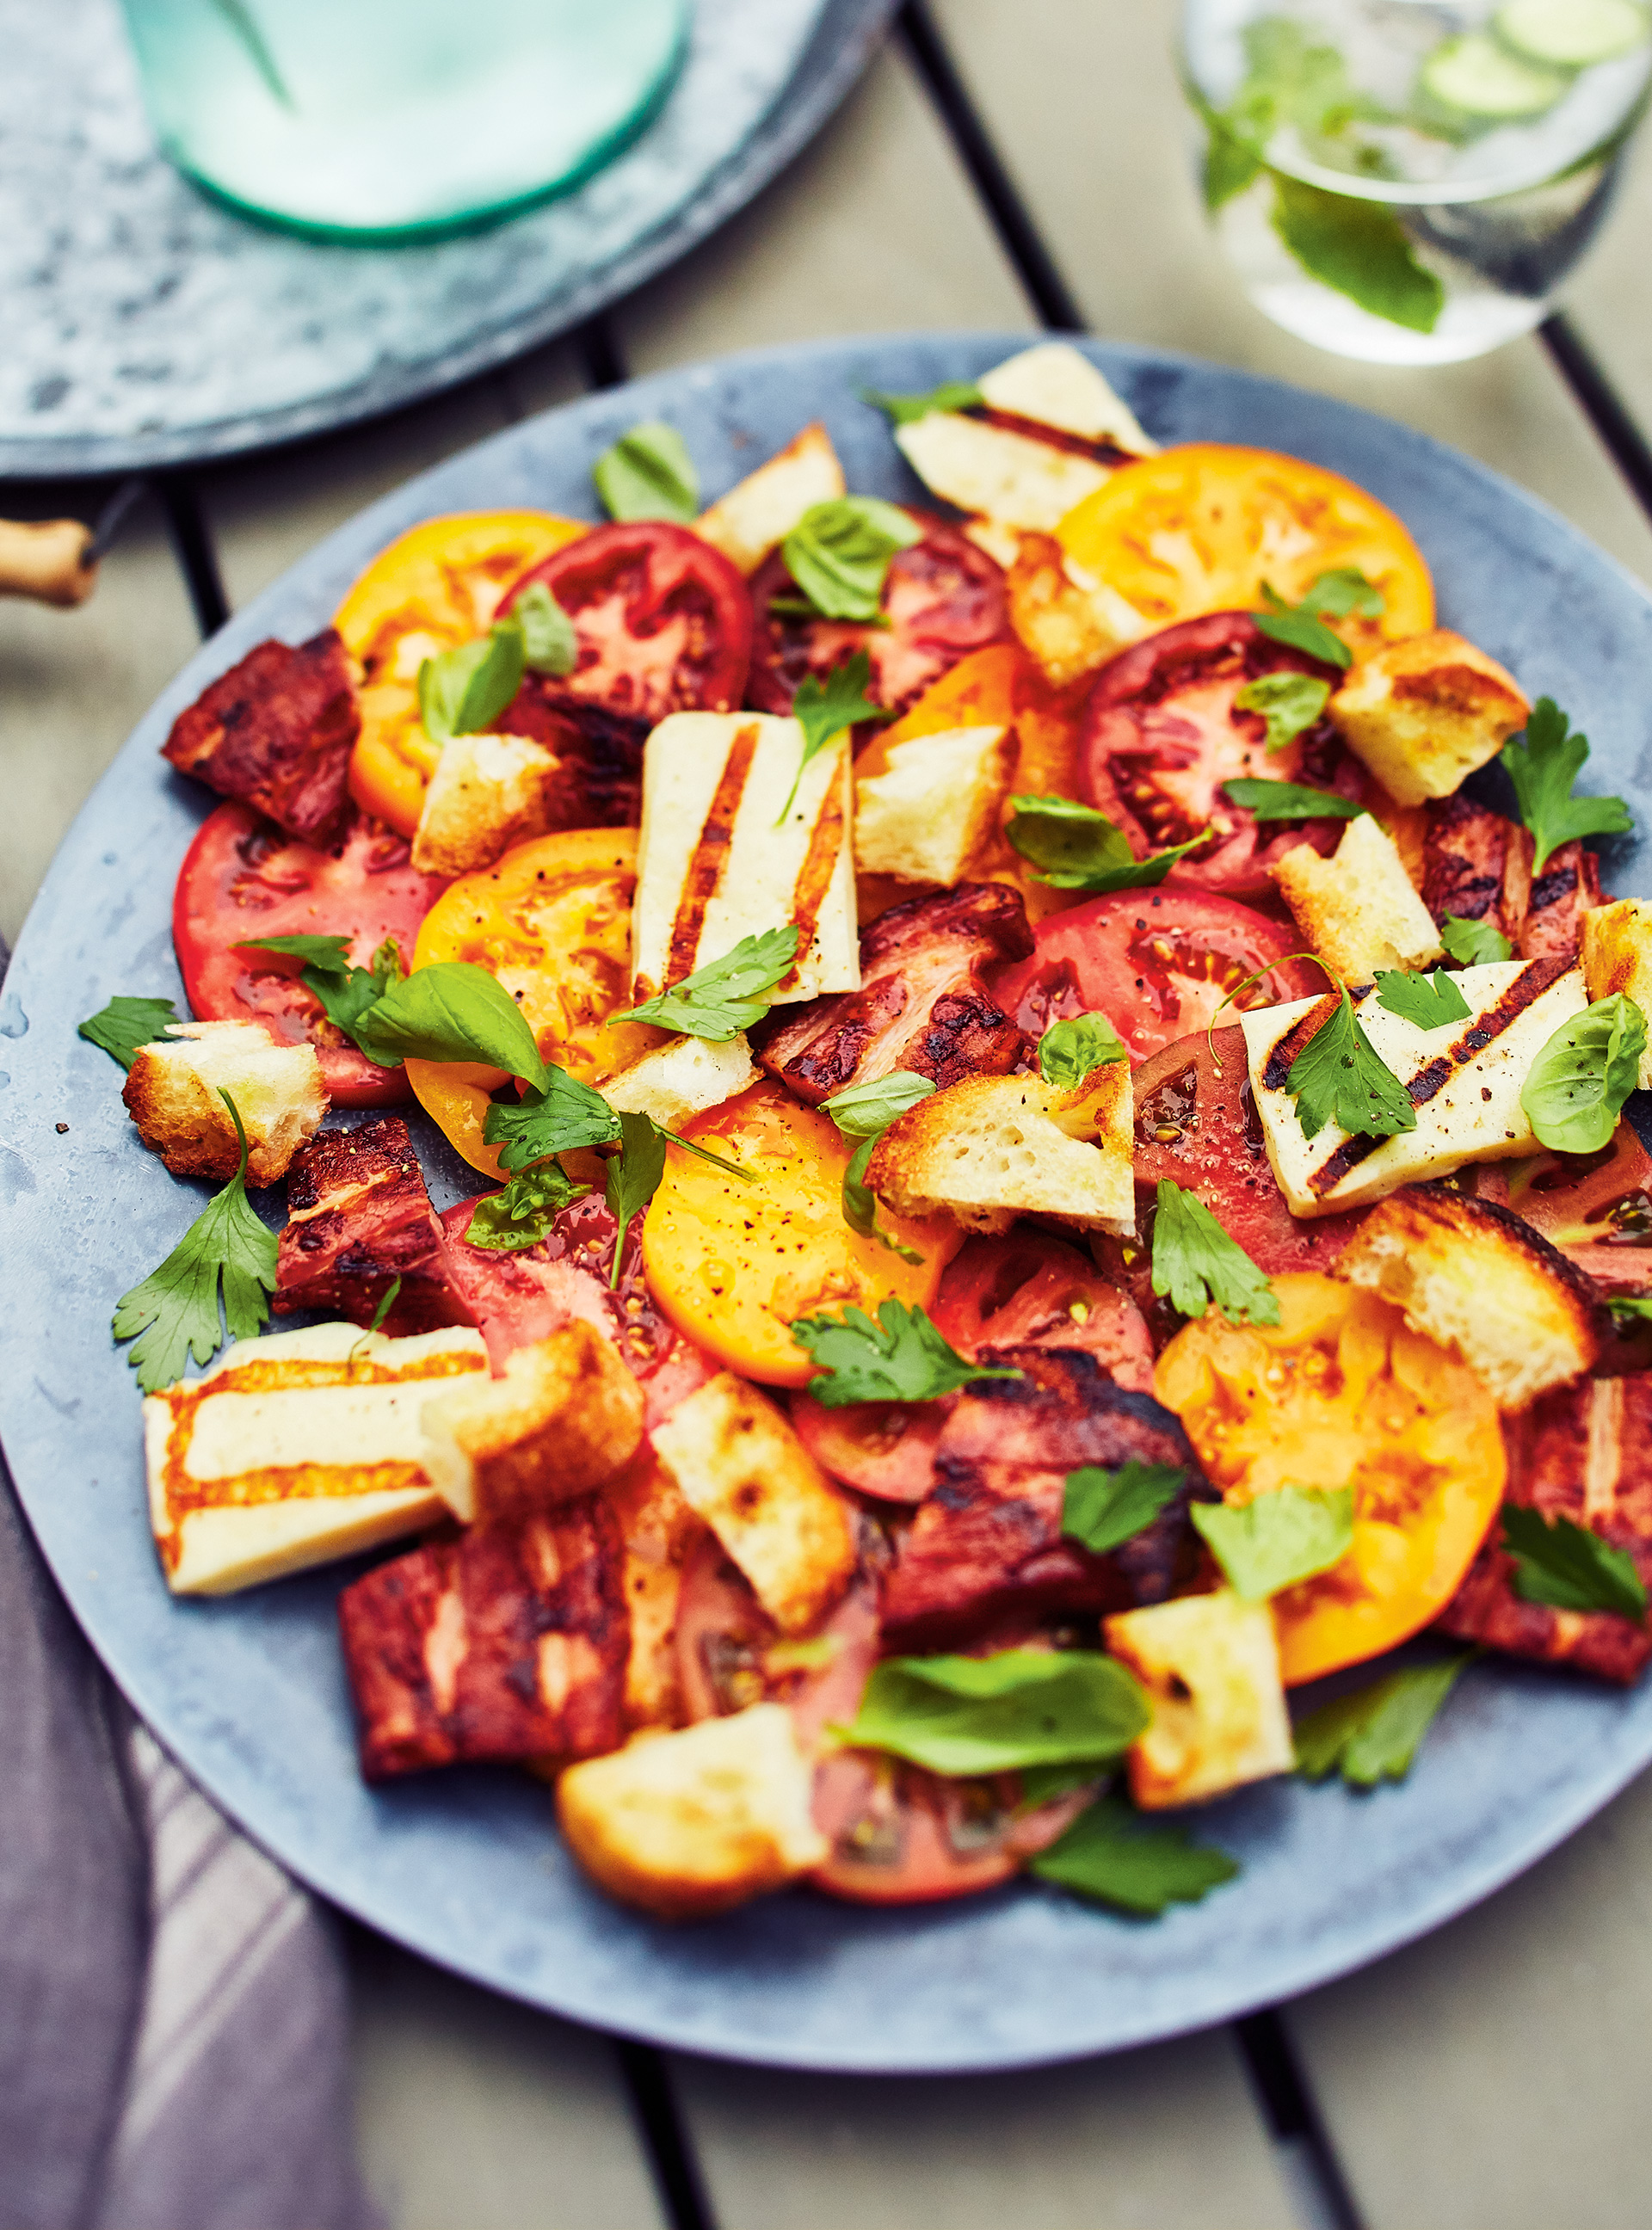 Tomato Salad with Grilled Halloumi Cheese and Bacon